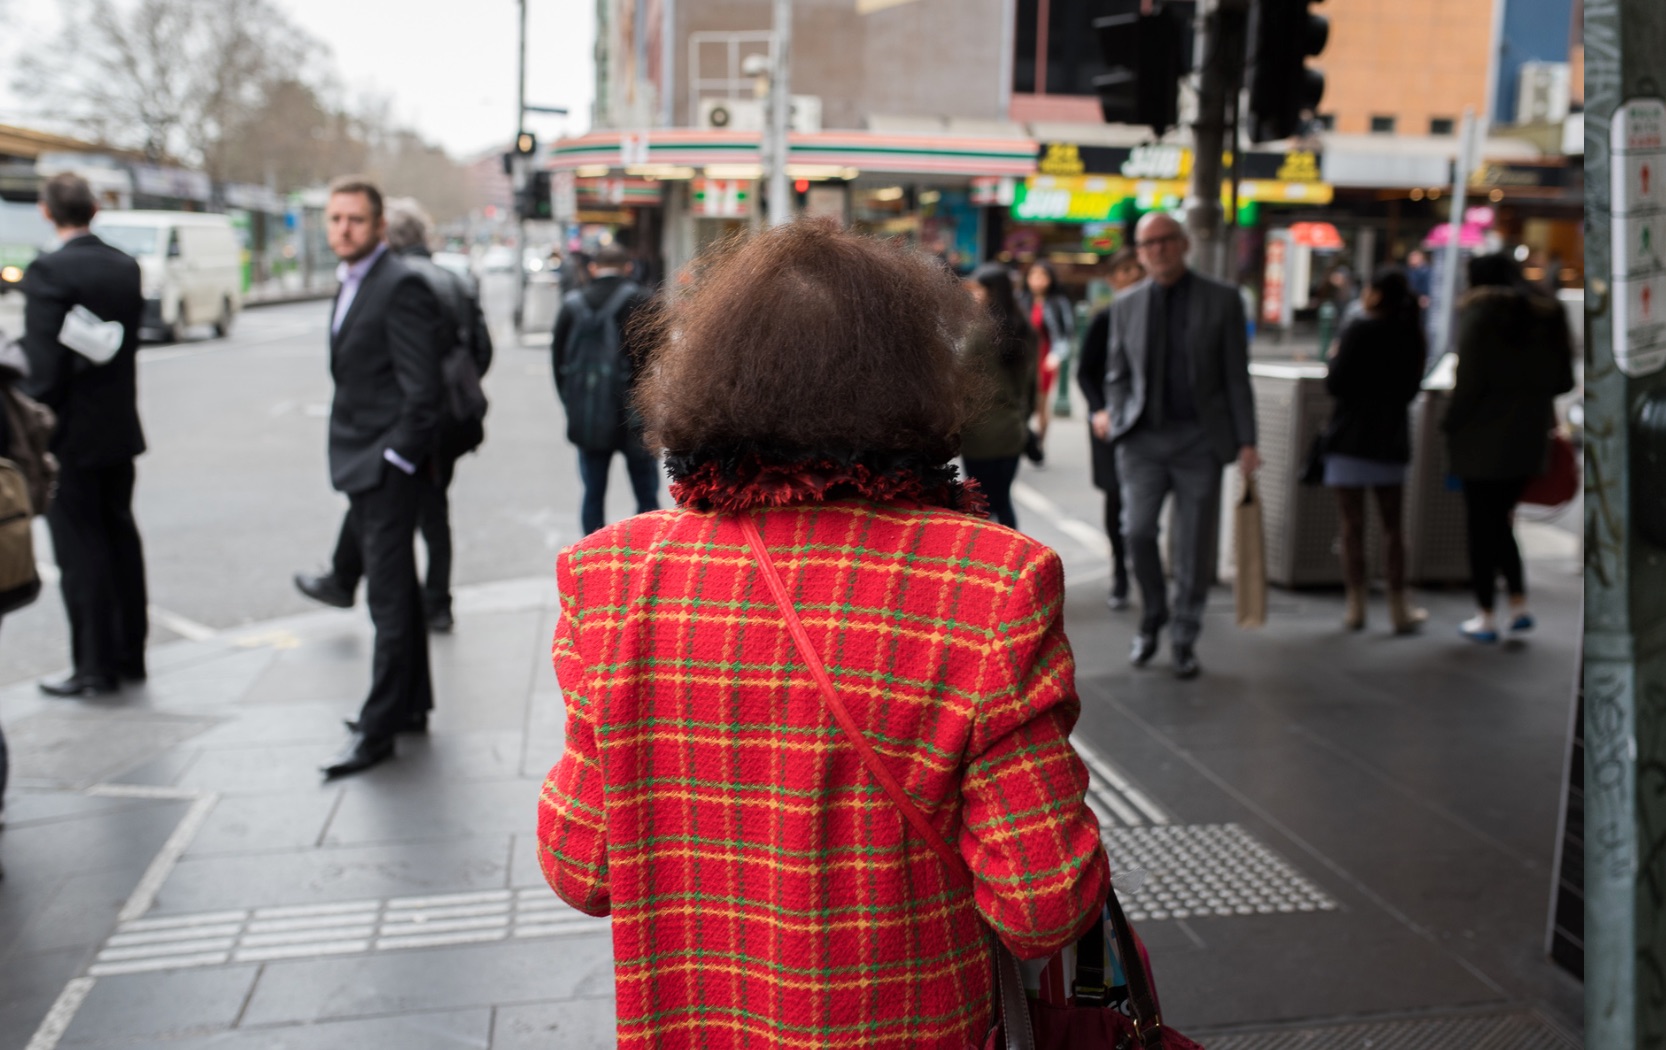 Danny_Tucker_Photography_-_Streets_of_Melbourne 2.jpg